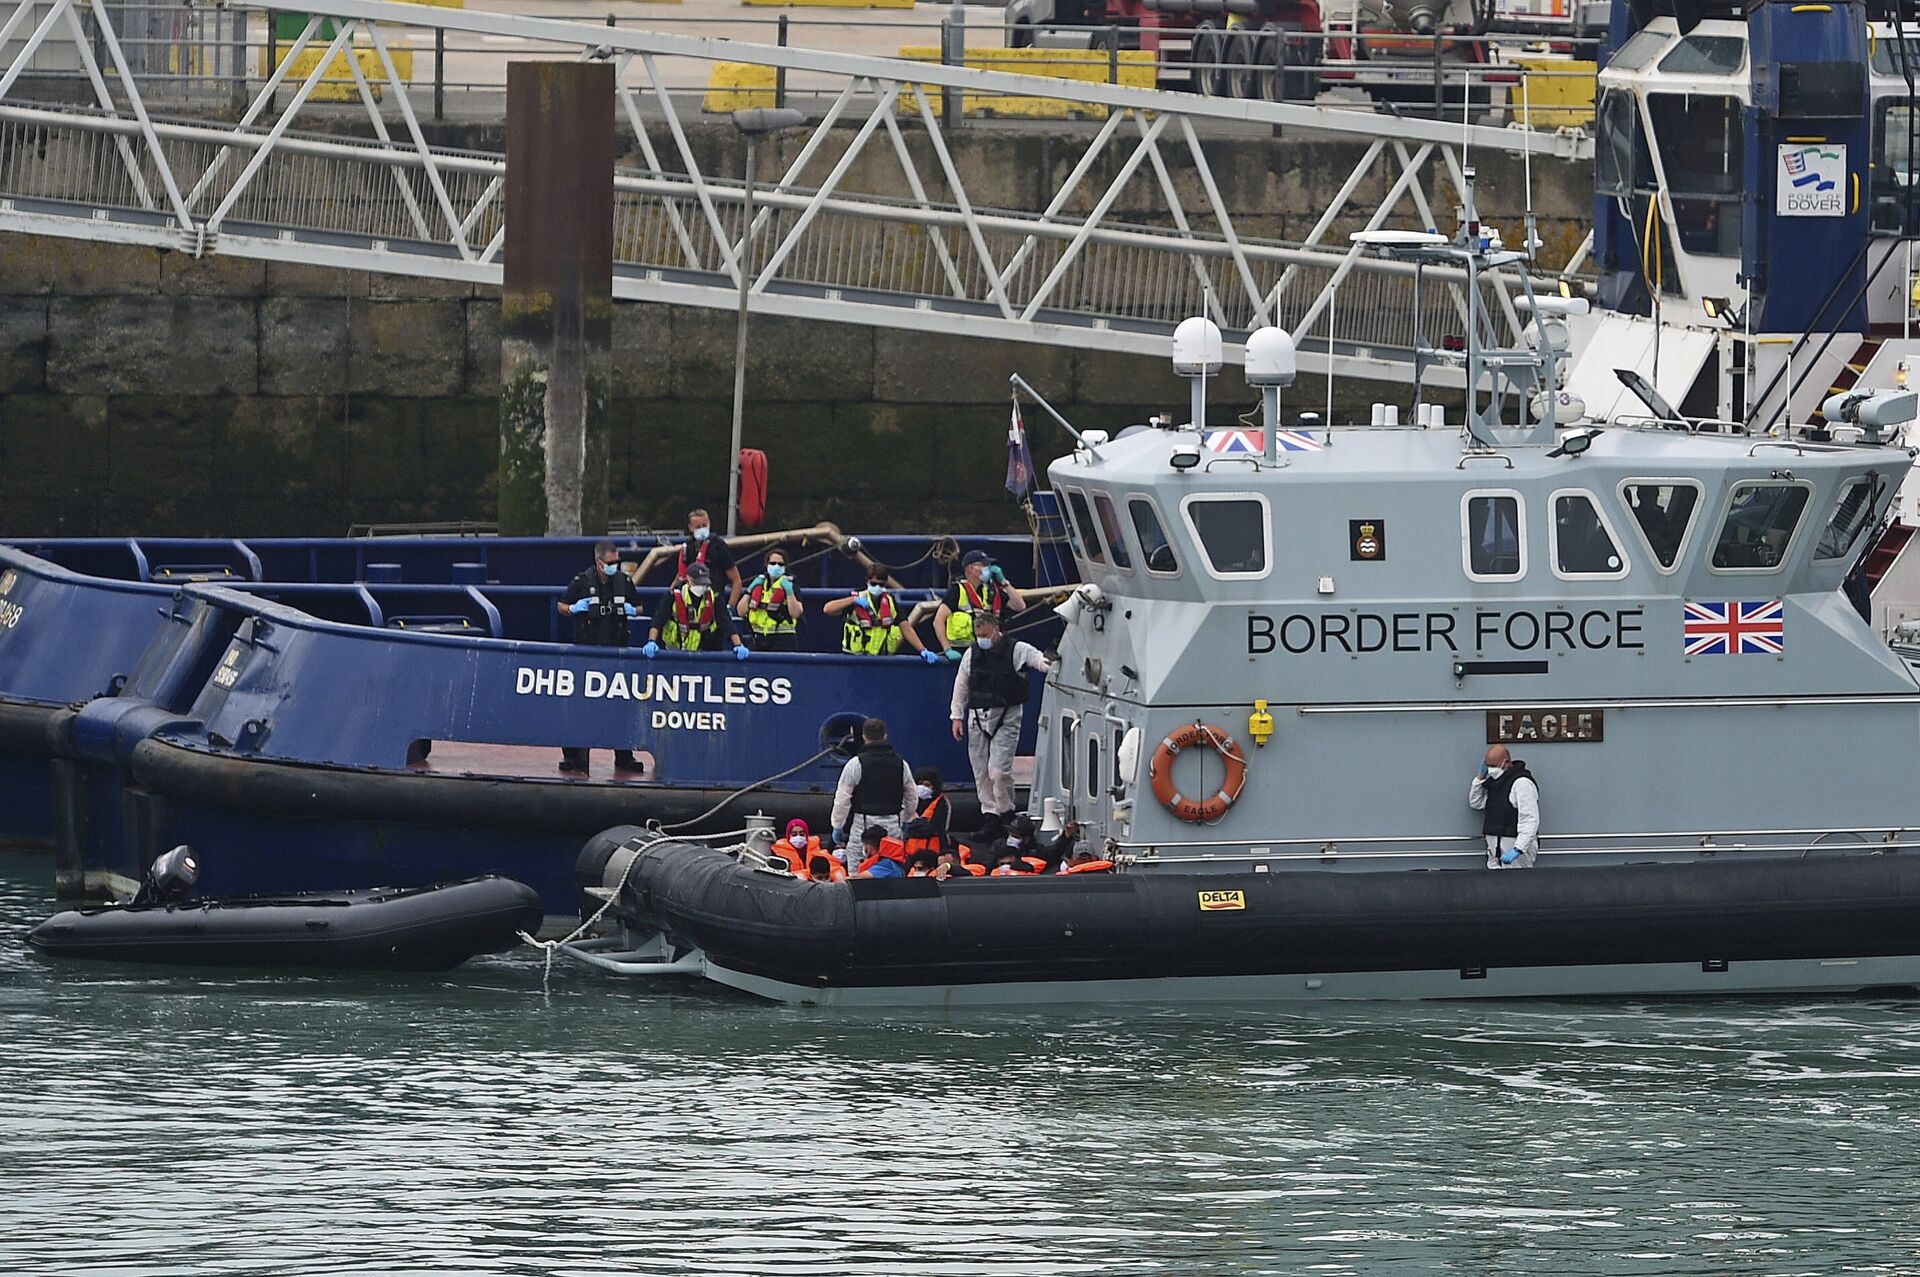 A group of people thought to be migrants are brought into Dover, England, Wednesday Aug. 12, 2020, by Border Force officers. (Kirsty O'Connor/PA via AP) - Sputnik International, 1920, 15.11.2021